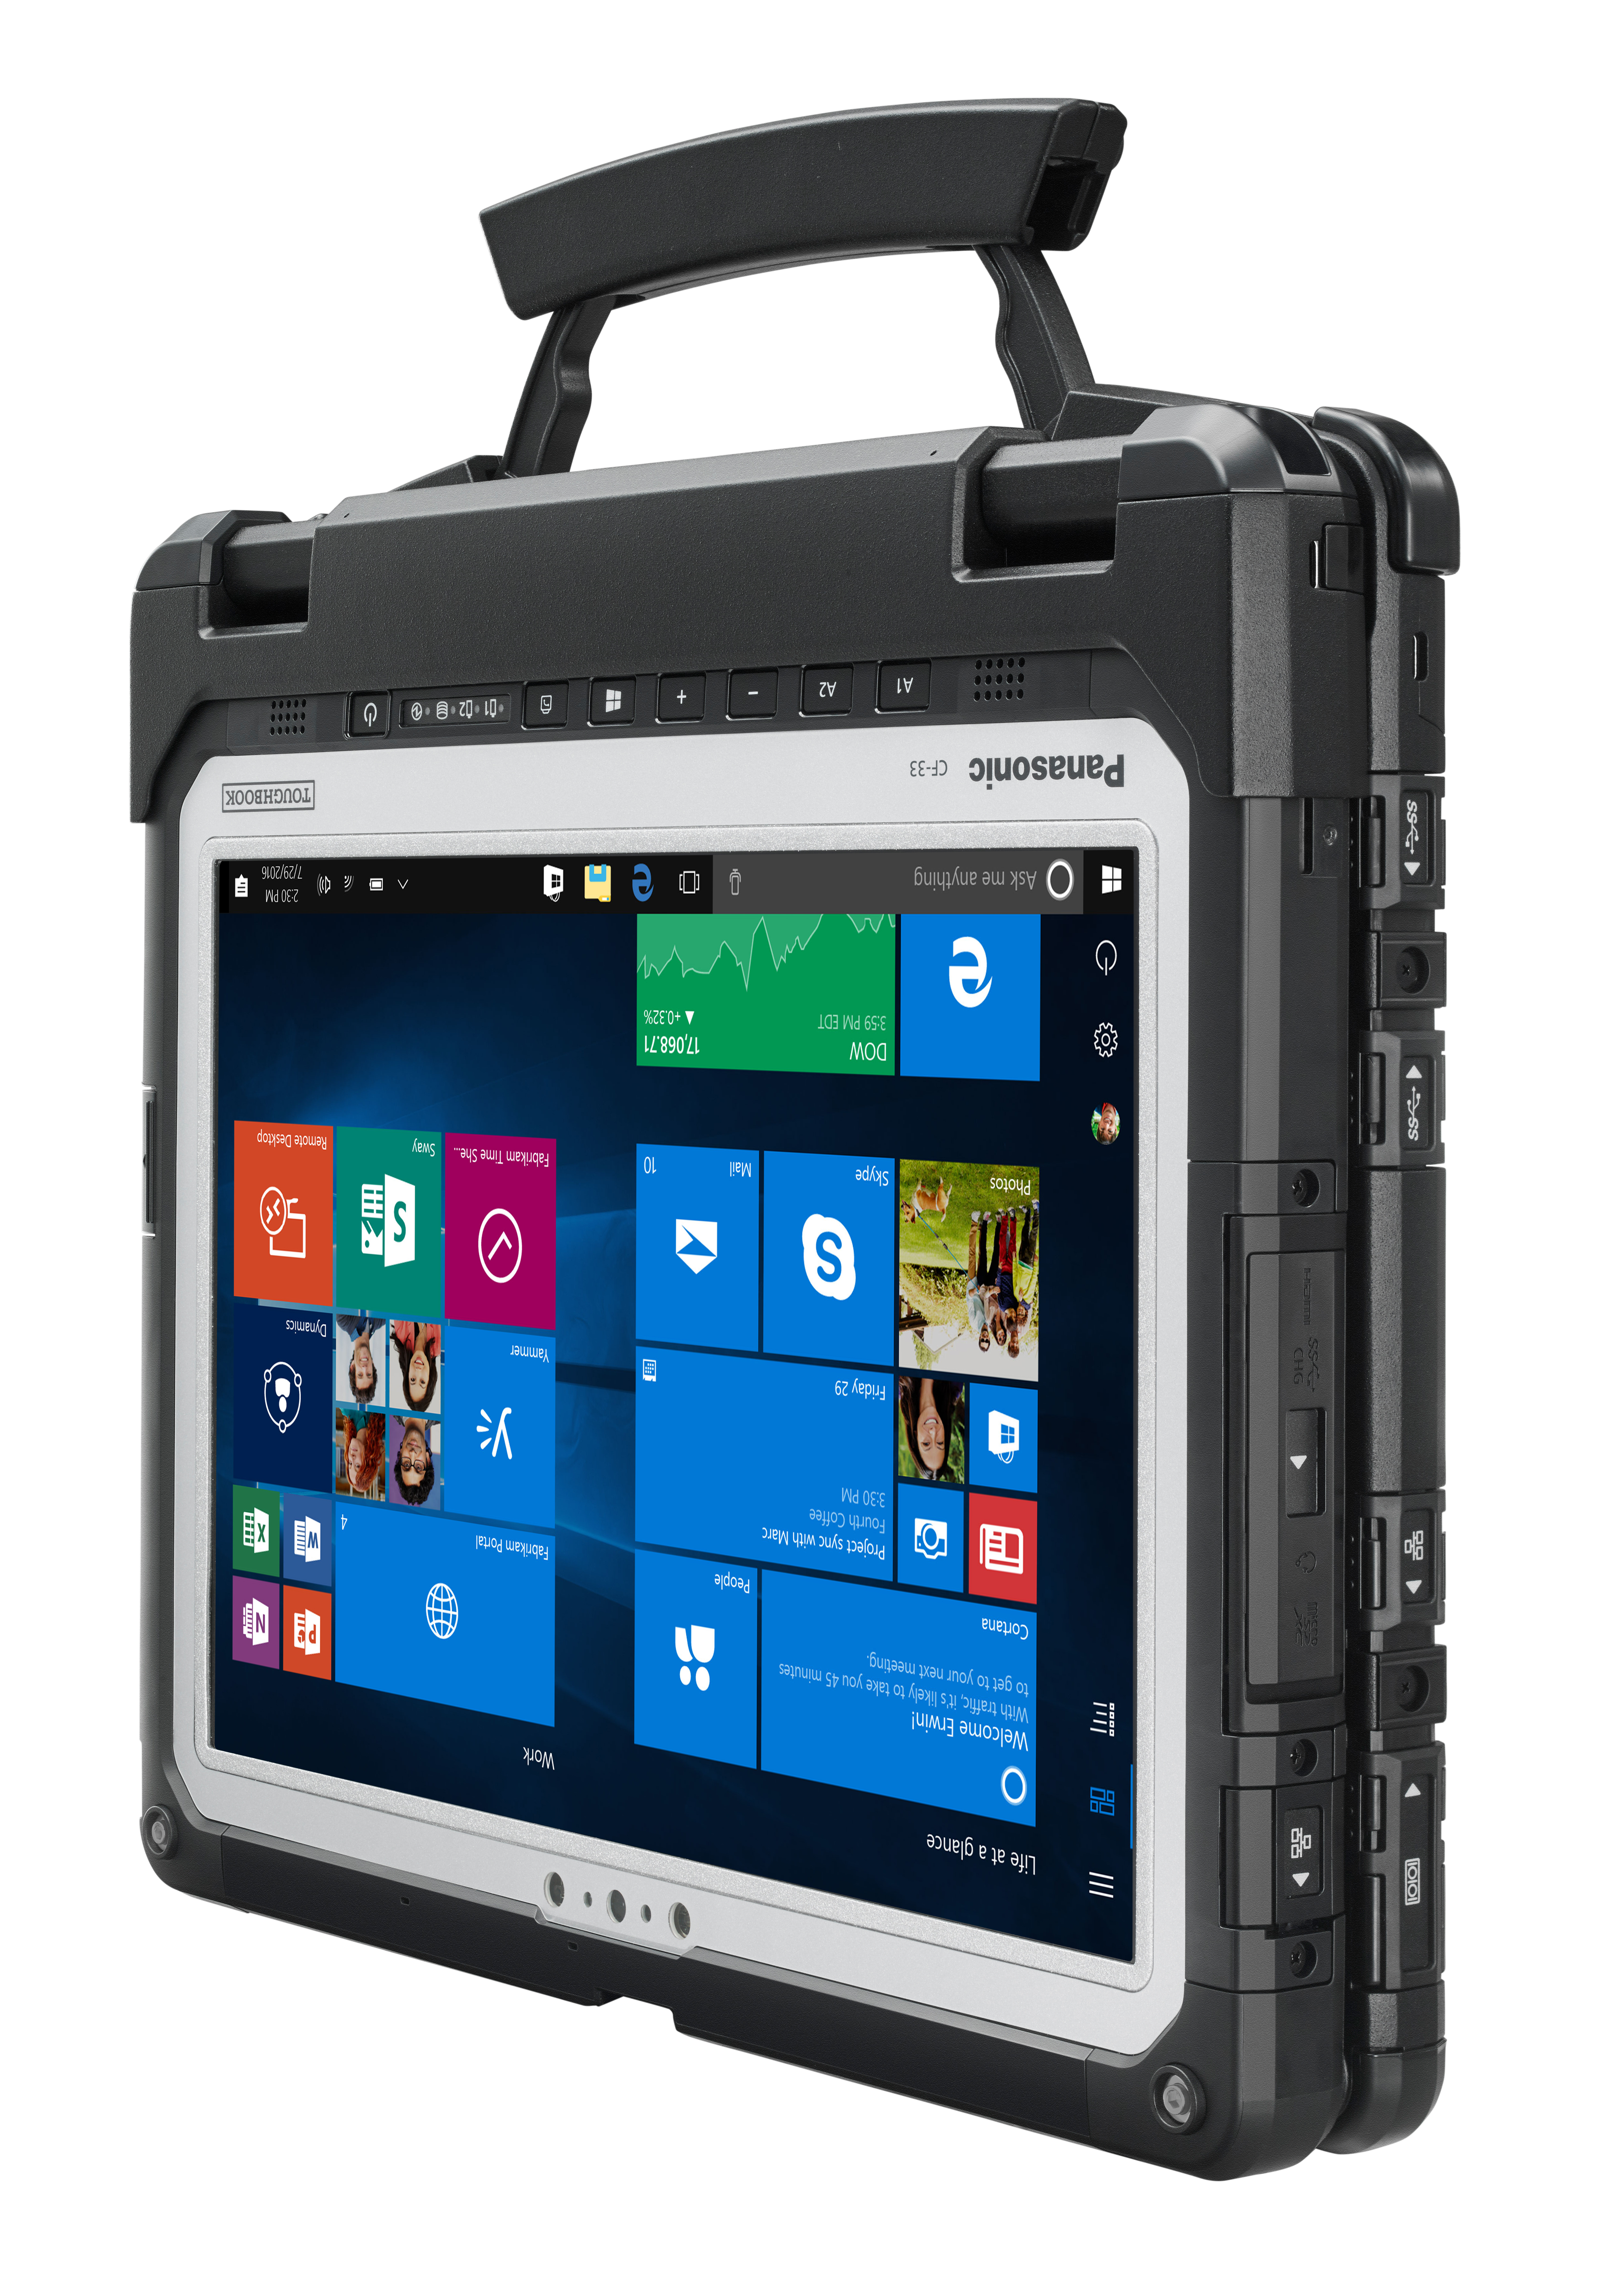 Panasonic Toughbook 33: Panasonic Toughbook 33 folded in tablet mode with screen showing